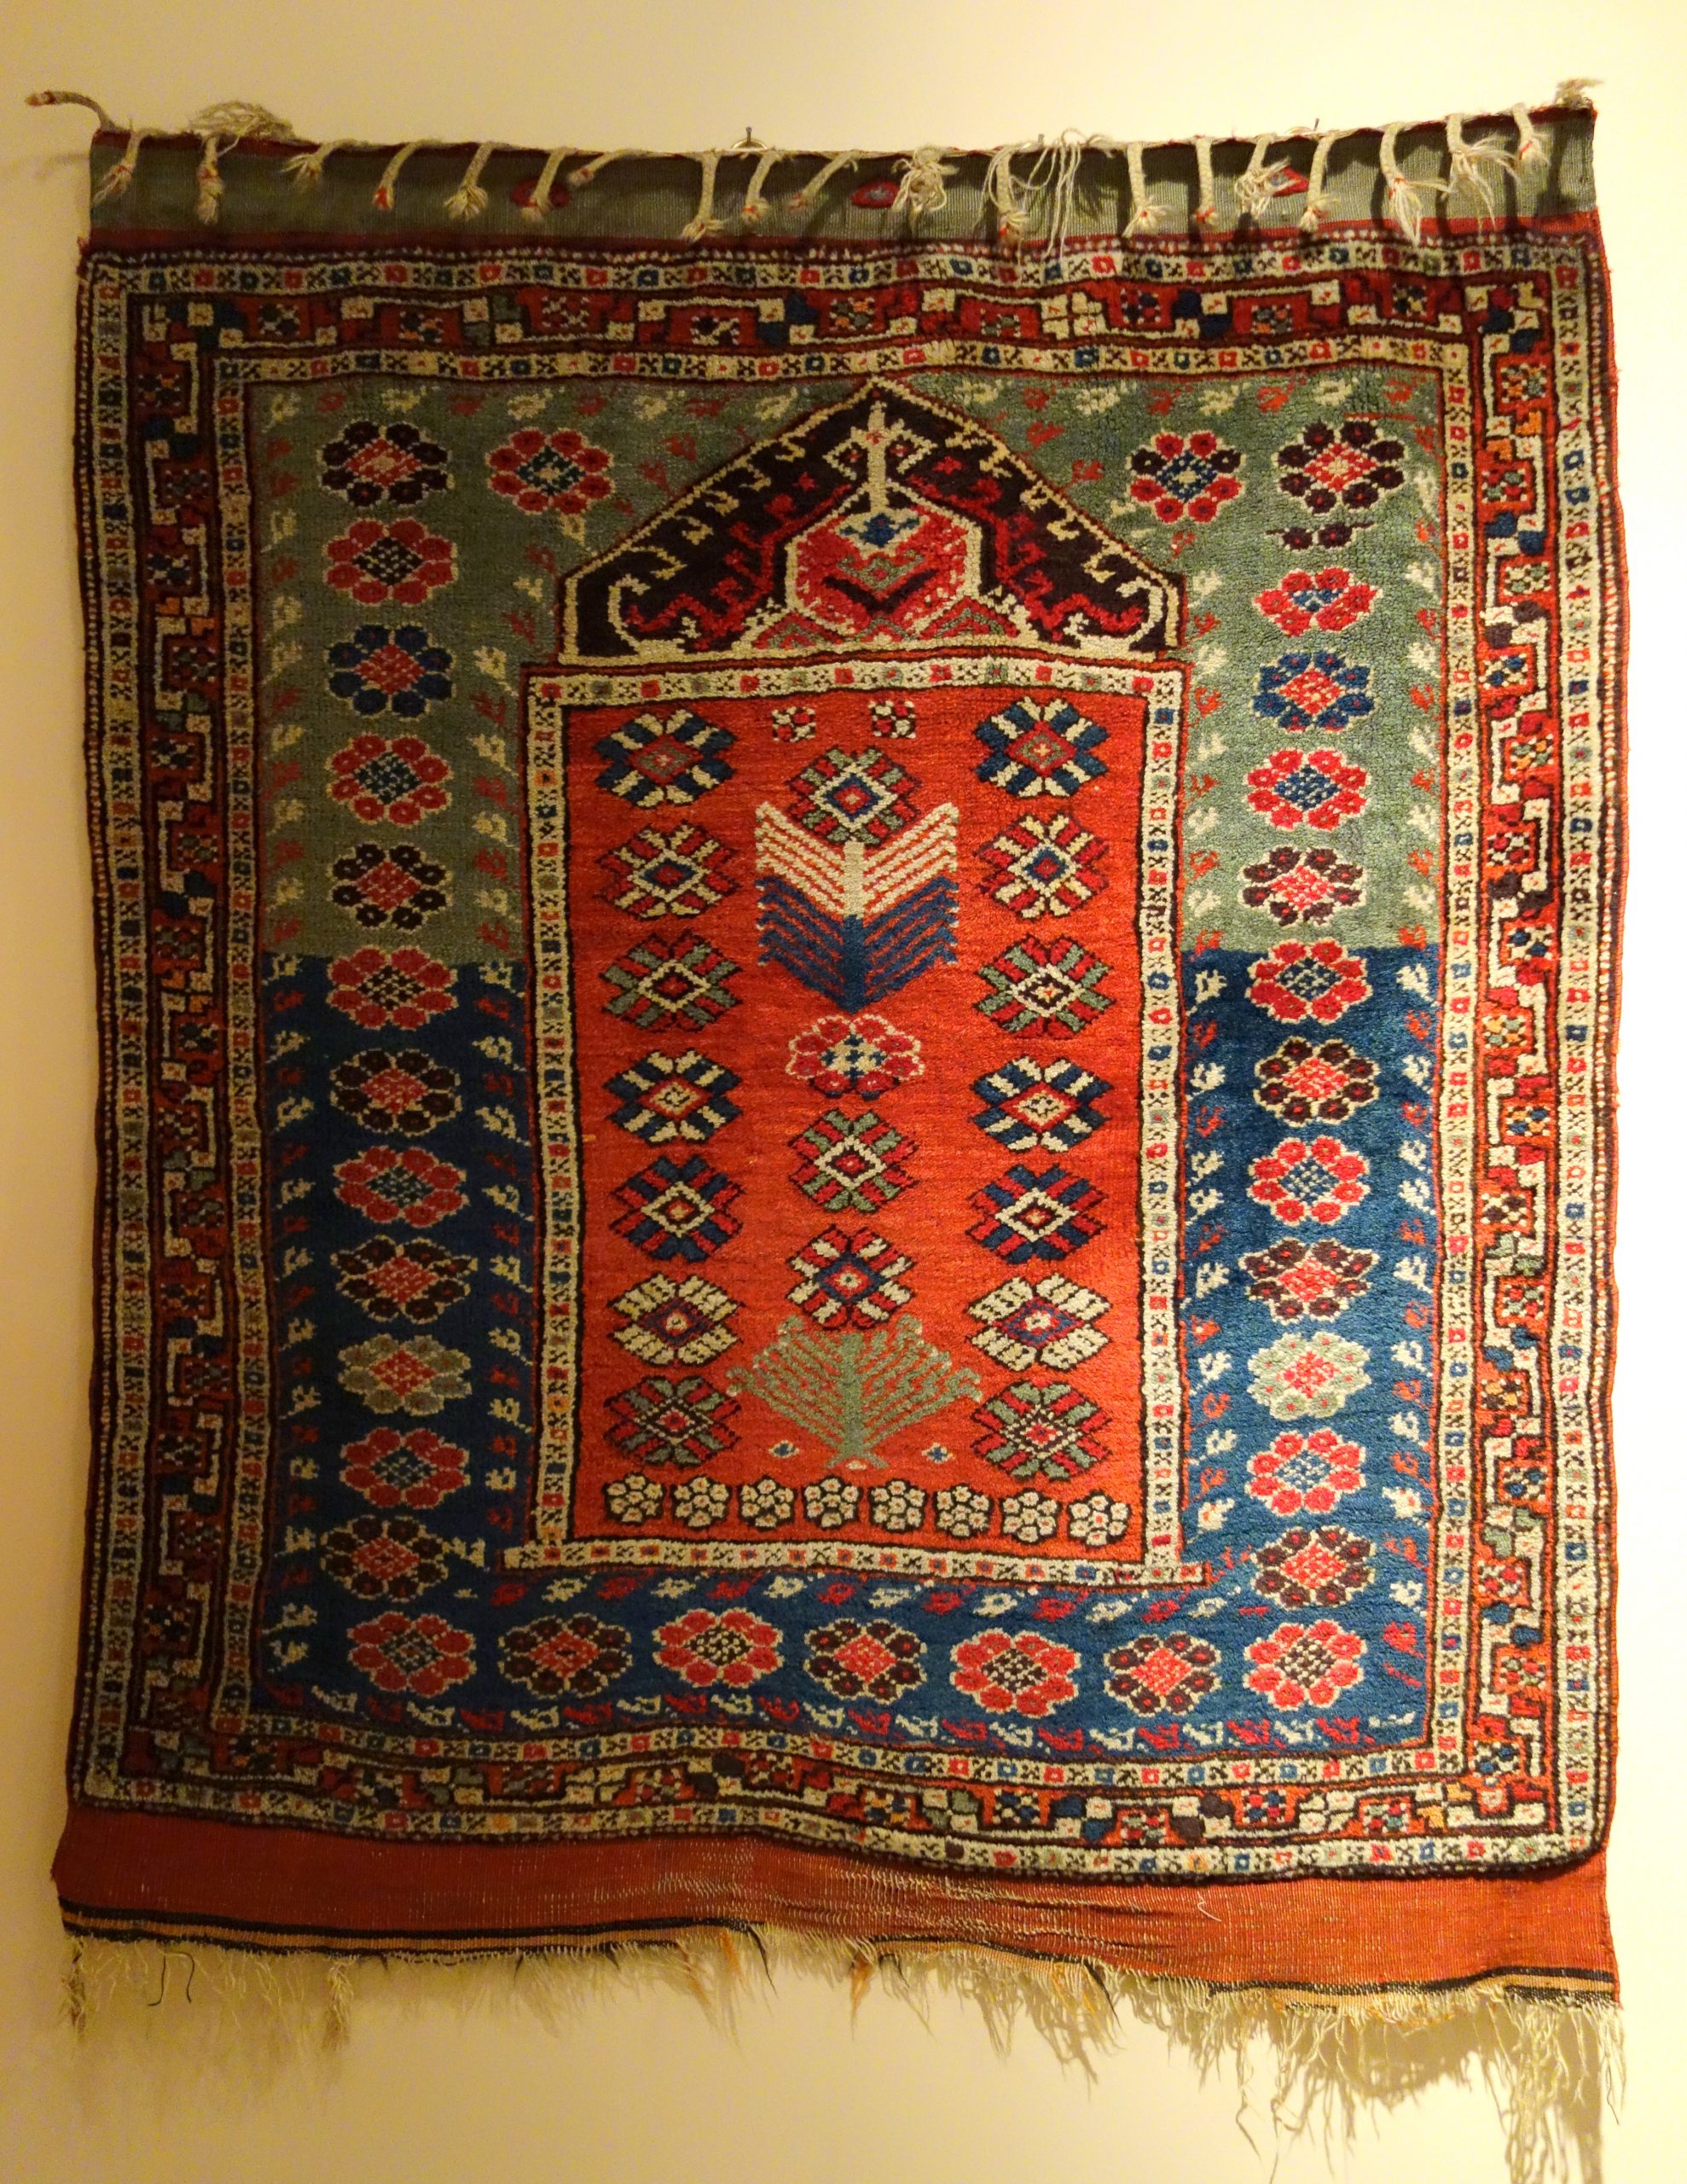 Image of Prayer Rug (Turkey) By Daderot (Own work) [CC0], via Wikimedia Commons